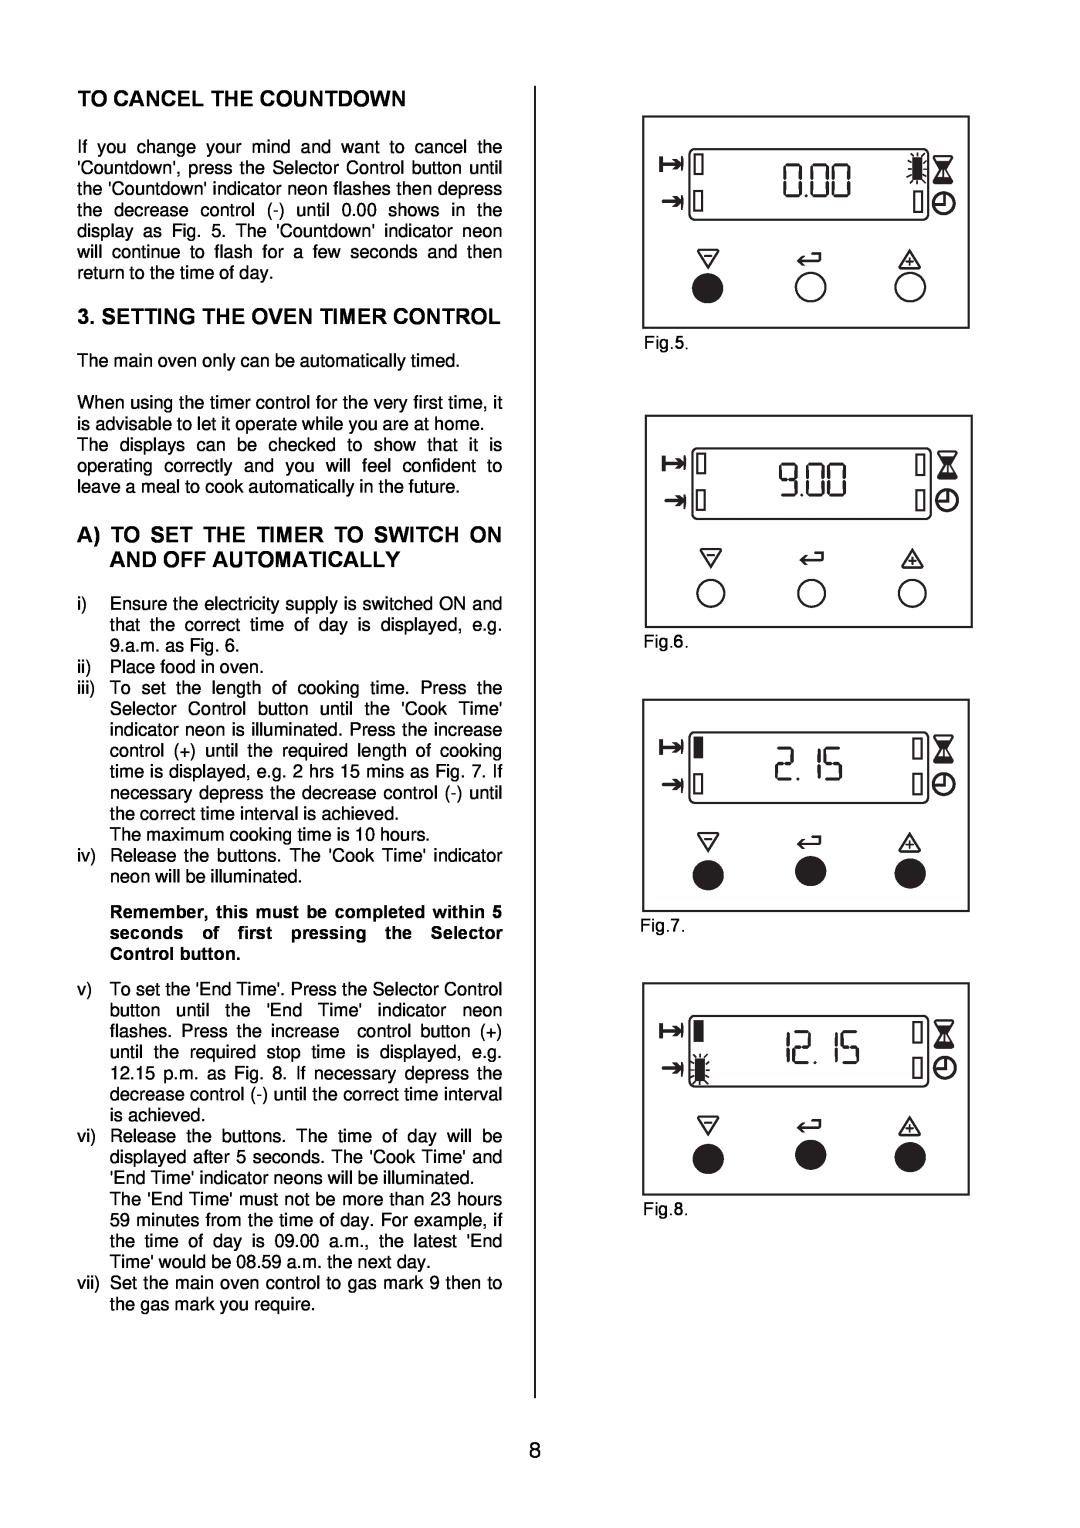 Electrolux EKG6046/EKG6047 manual To Cancel The Countdown, Setting The Oven Timer Control 